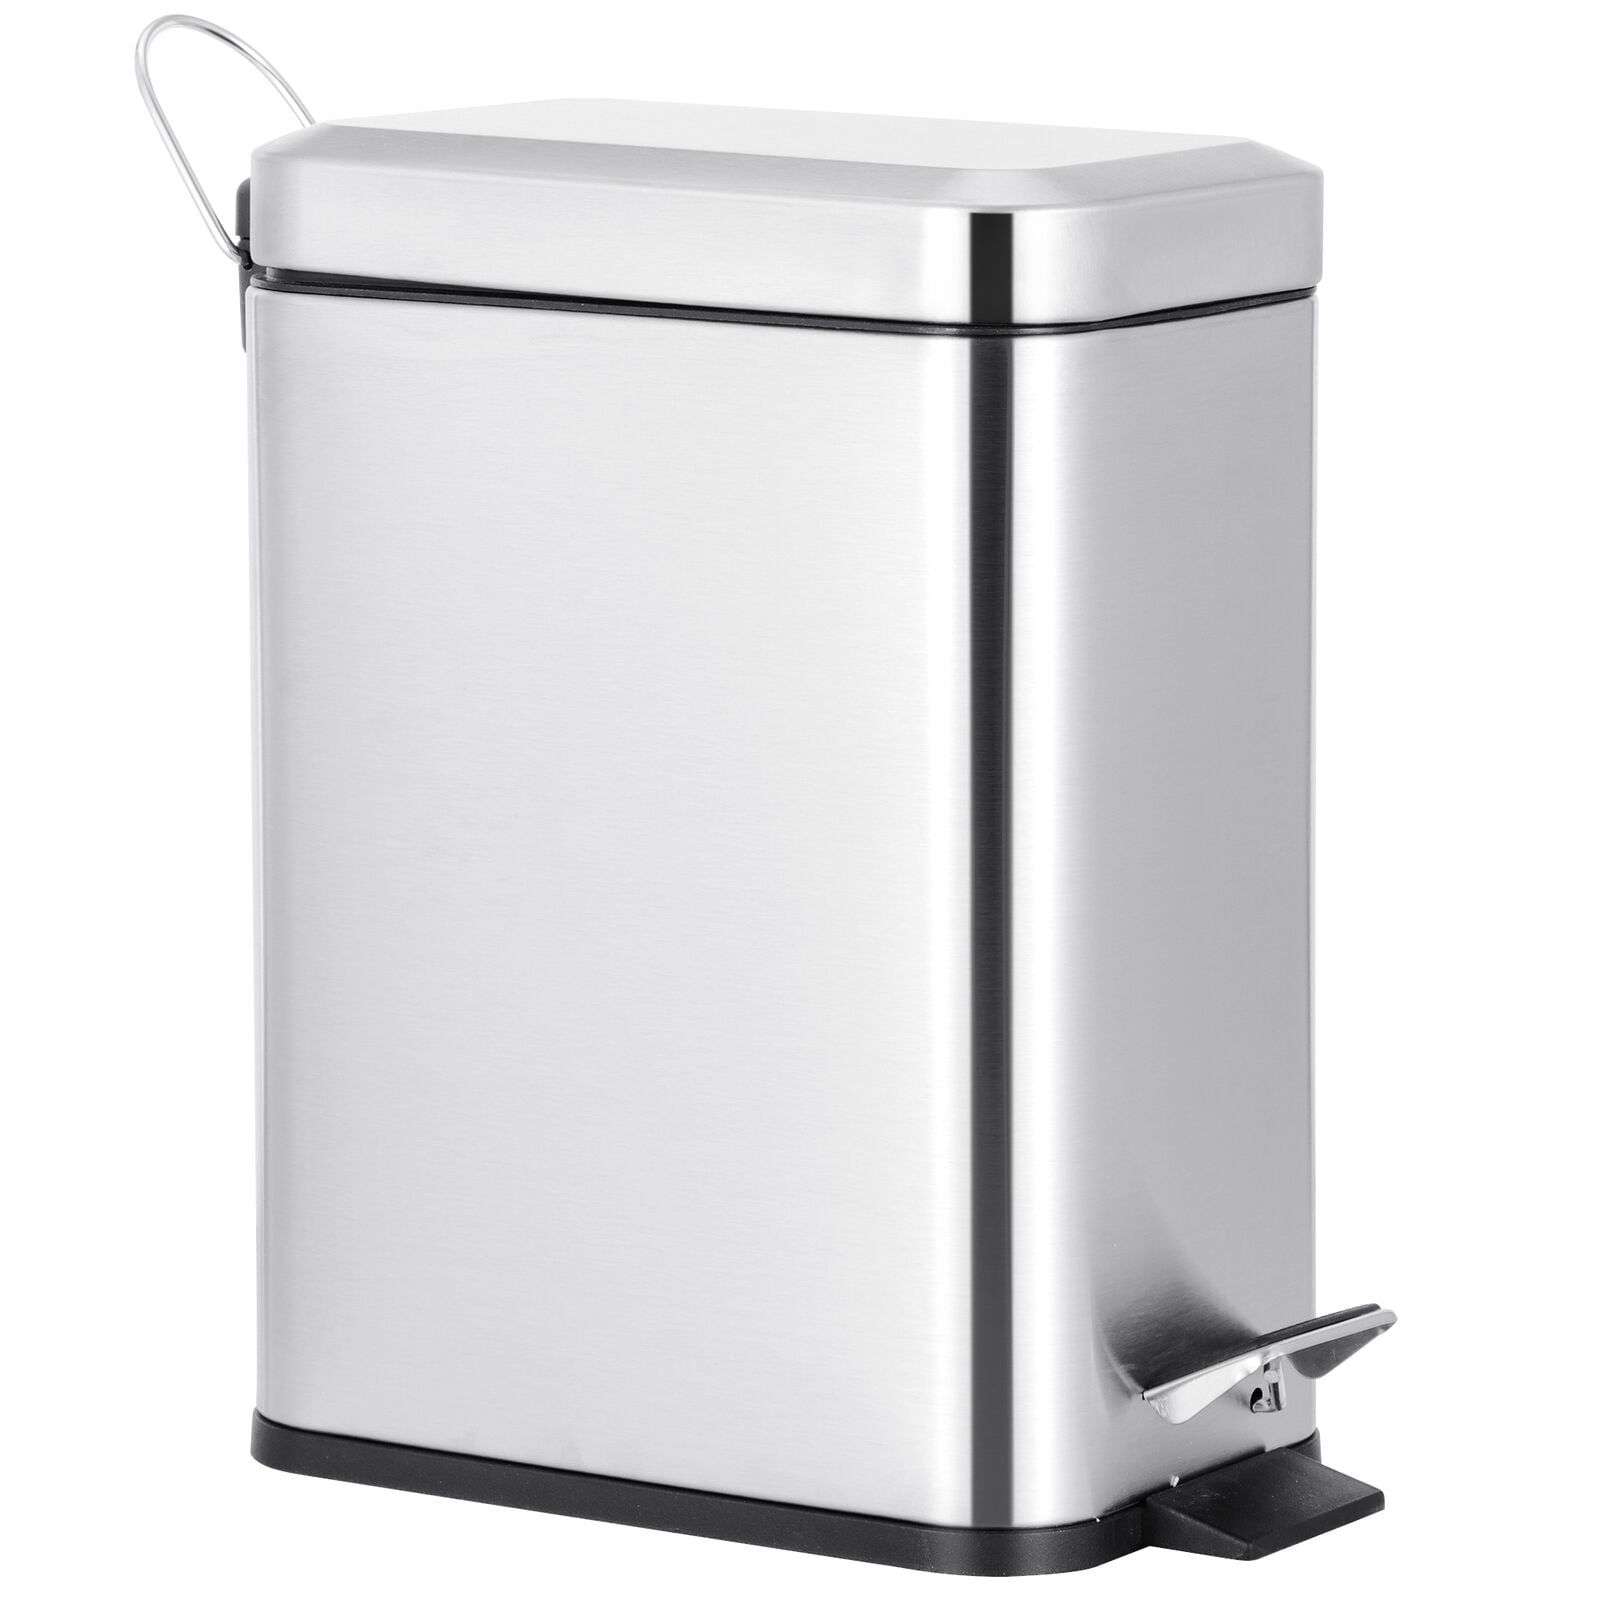 Details about   1.3 Gallon Garbage Container Bin Trash Can for Bathroom Powder Room Bedroom 